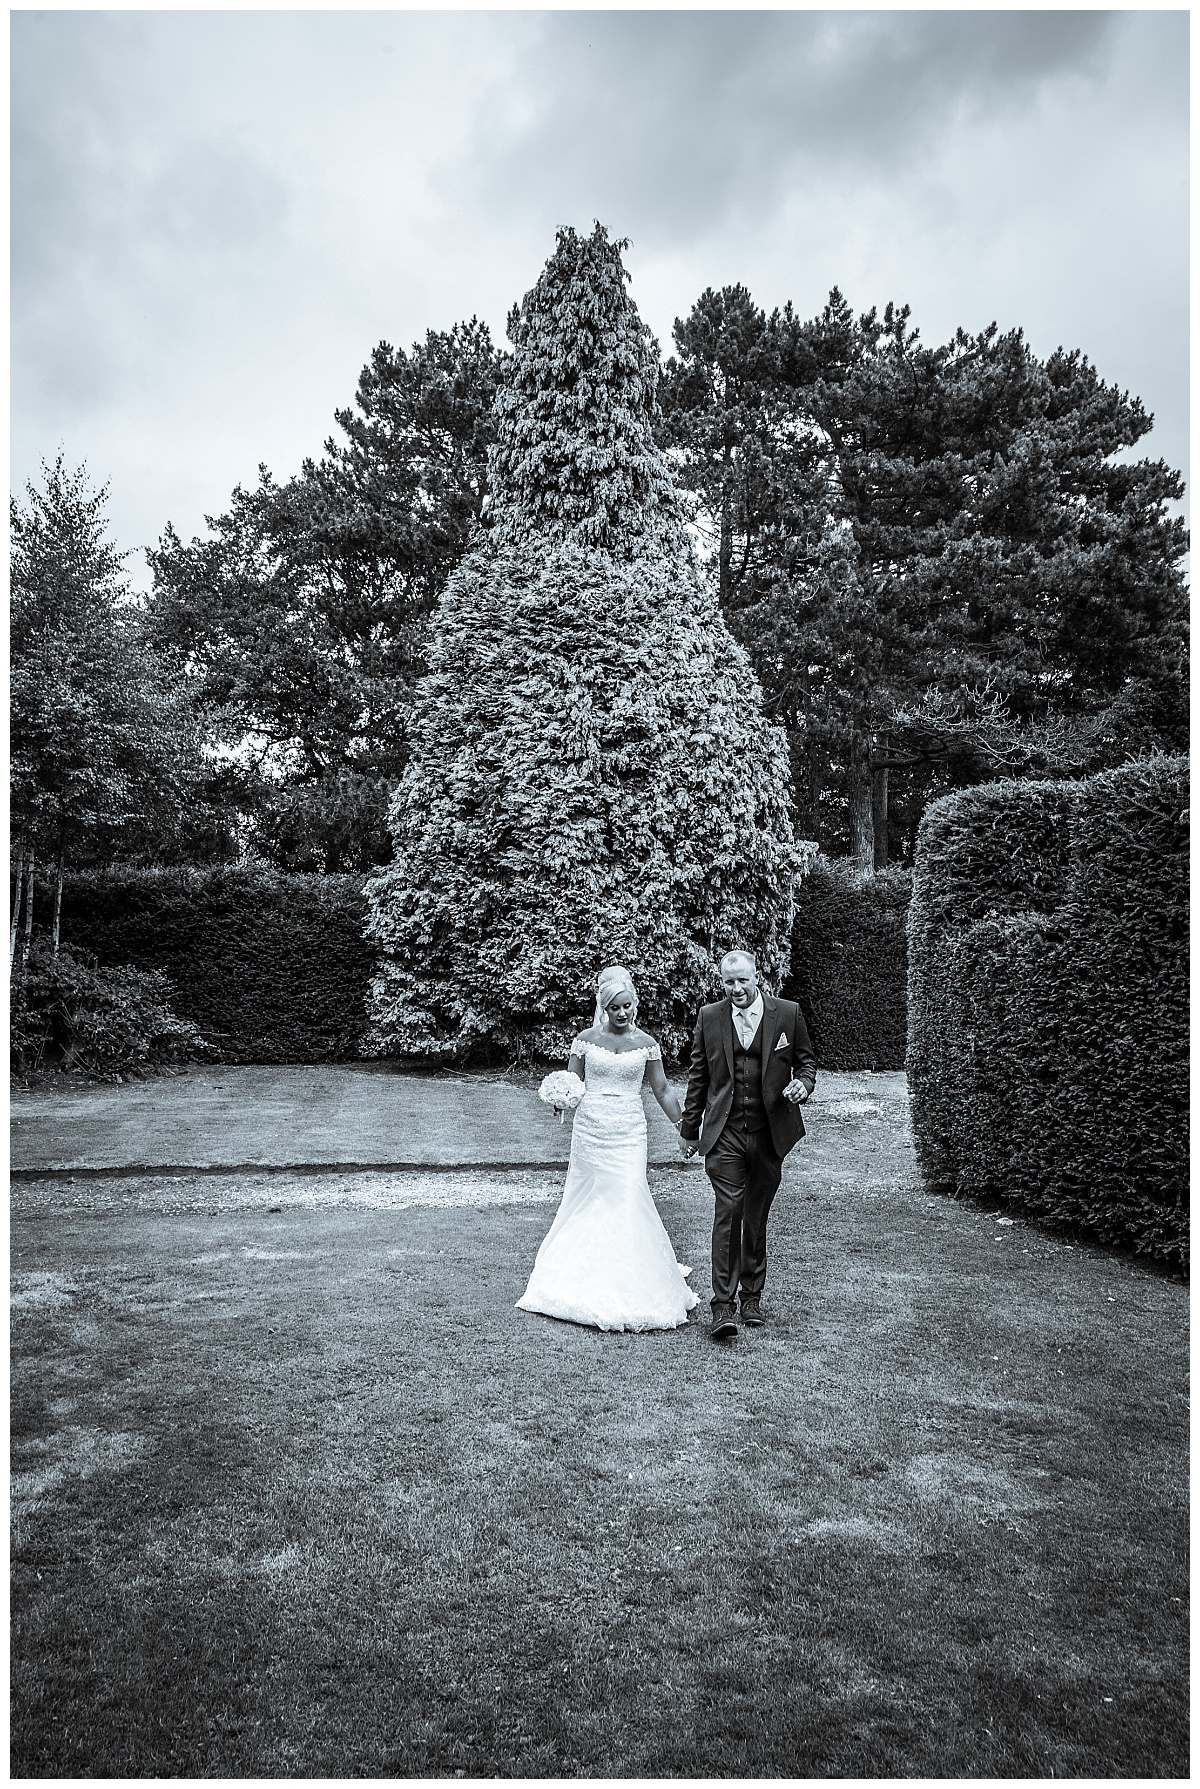 Wedding Photography Manchester - Paula and Daves Mere Court Hotel Wedding 39